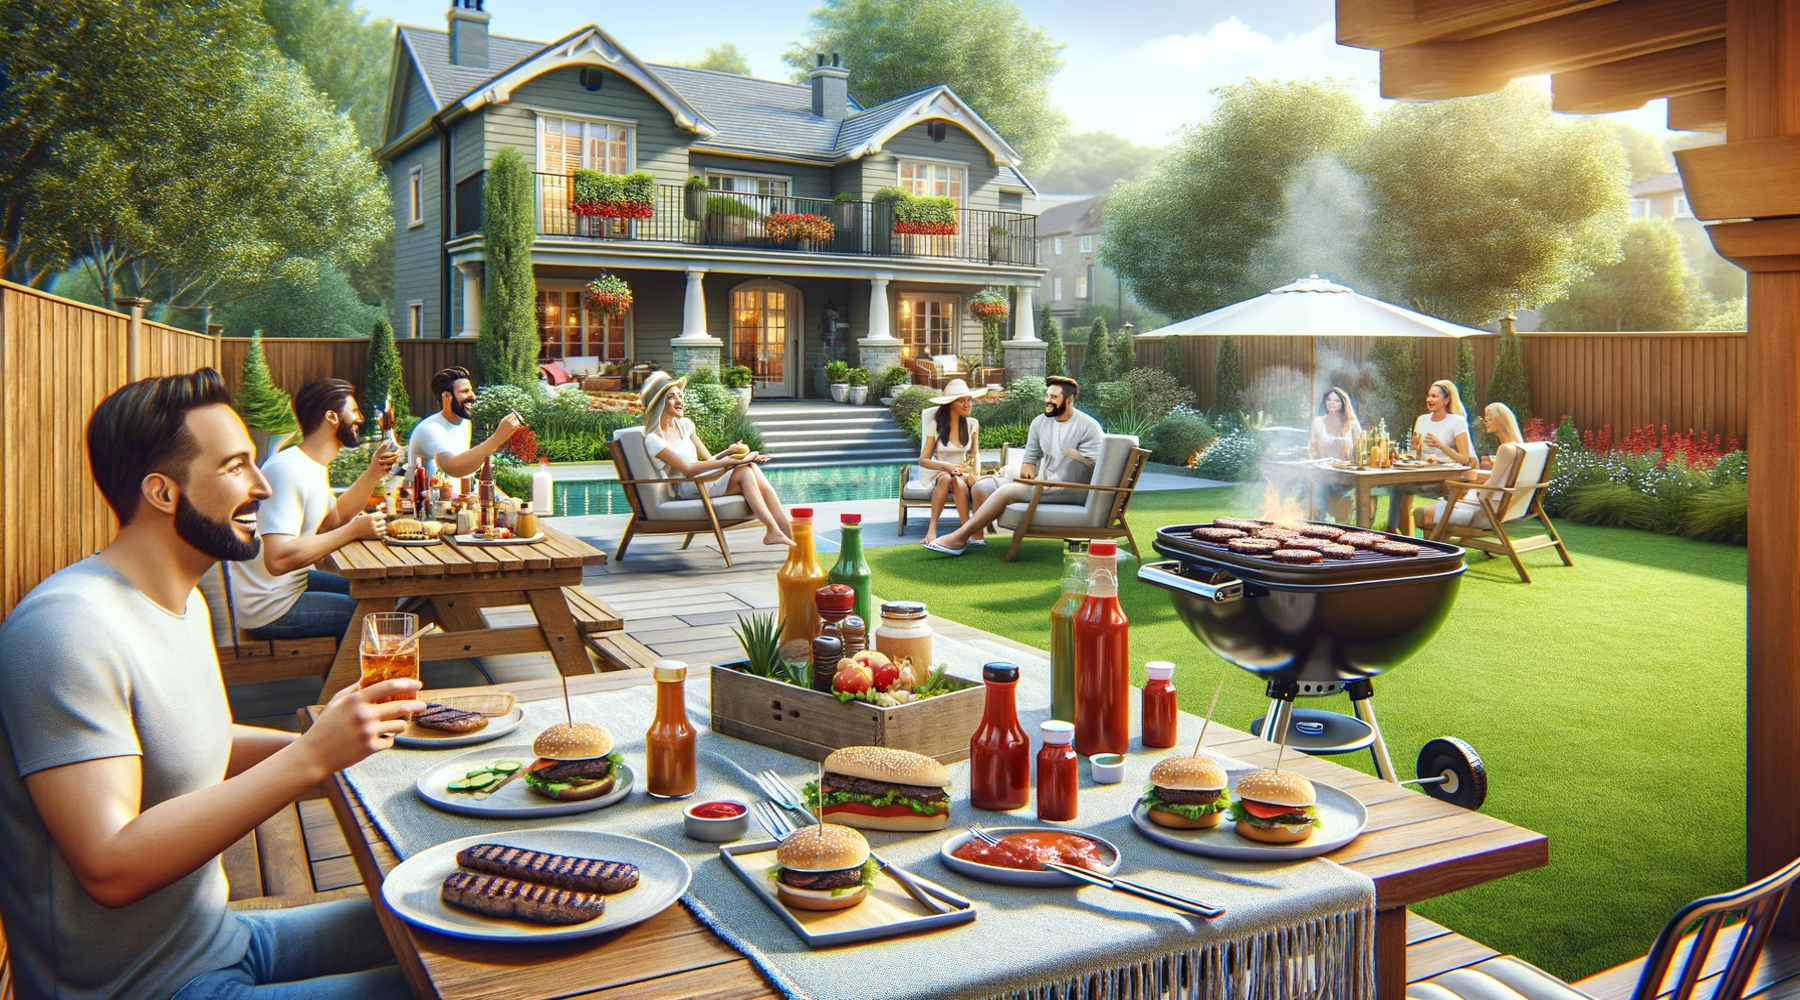 Illustration of a backyard bbq with lots of people and food.